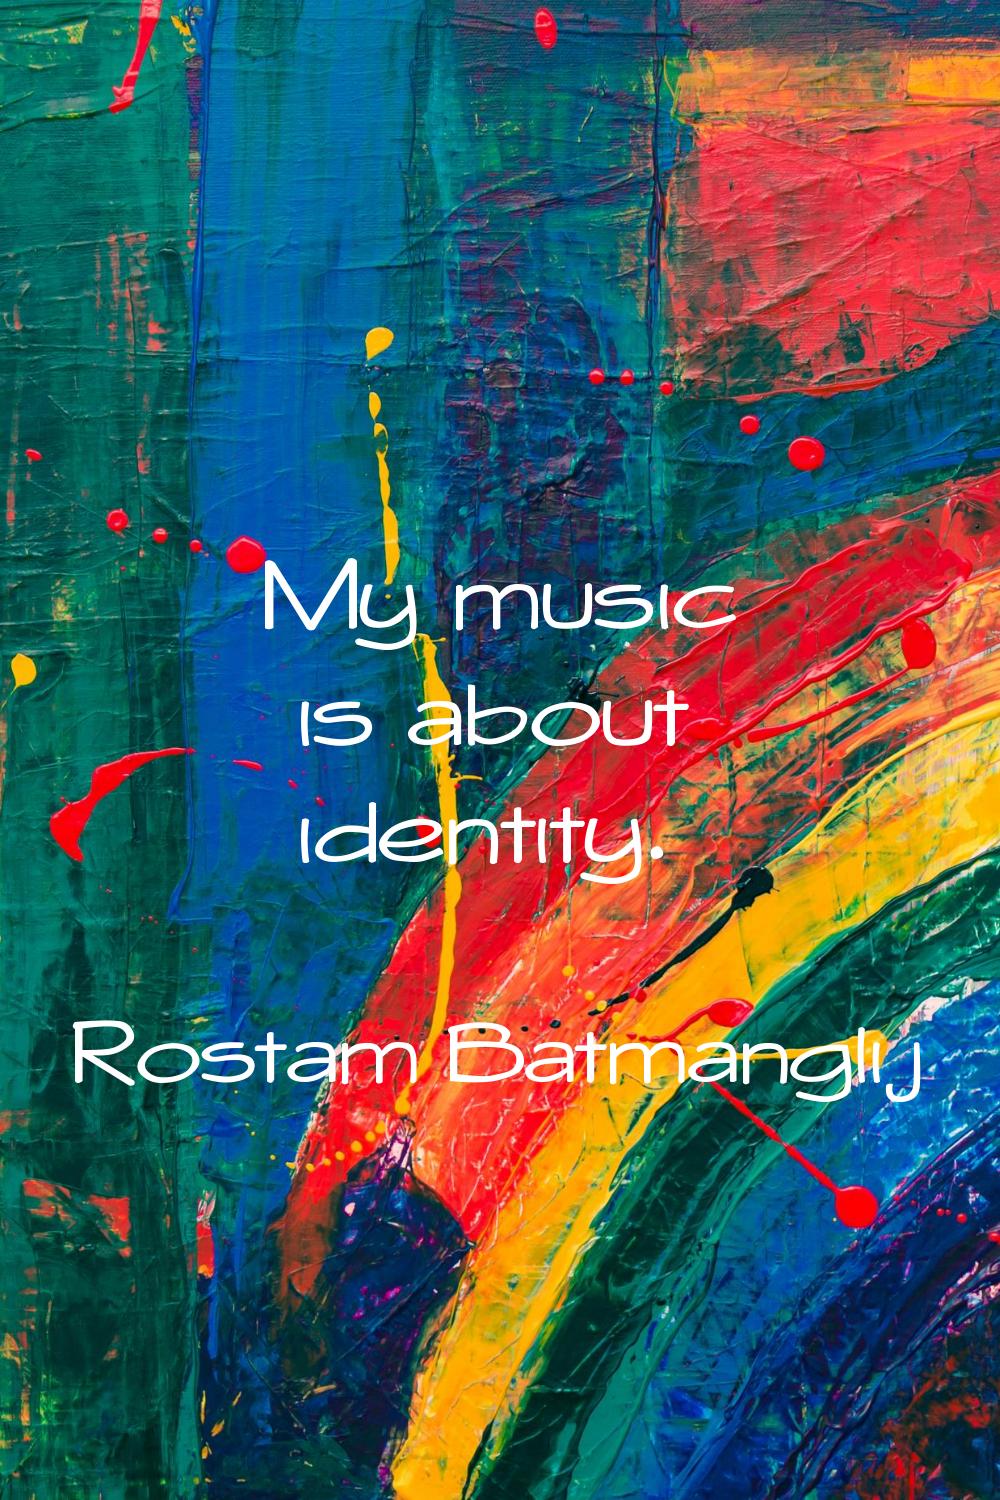 My music is about identity.